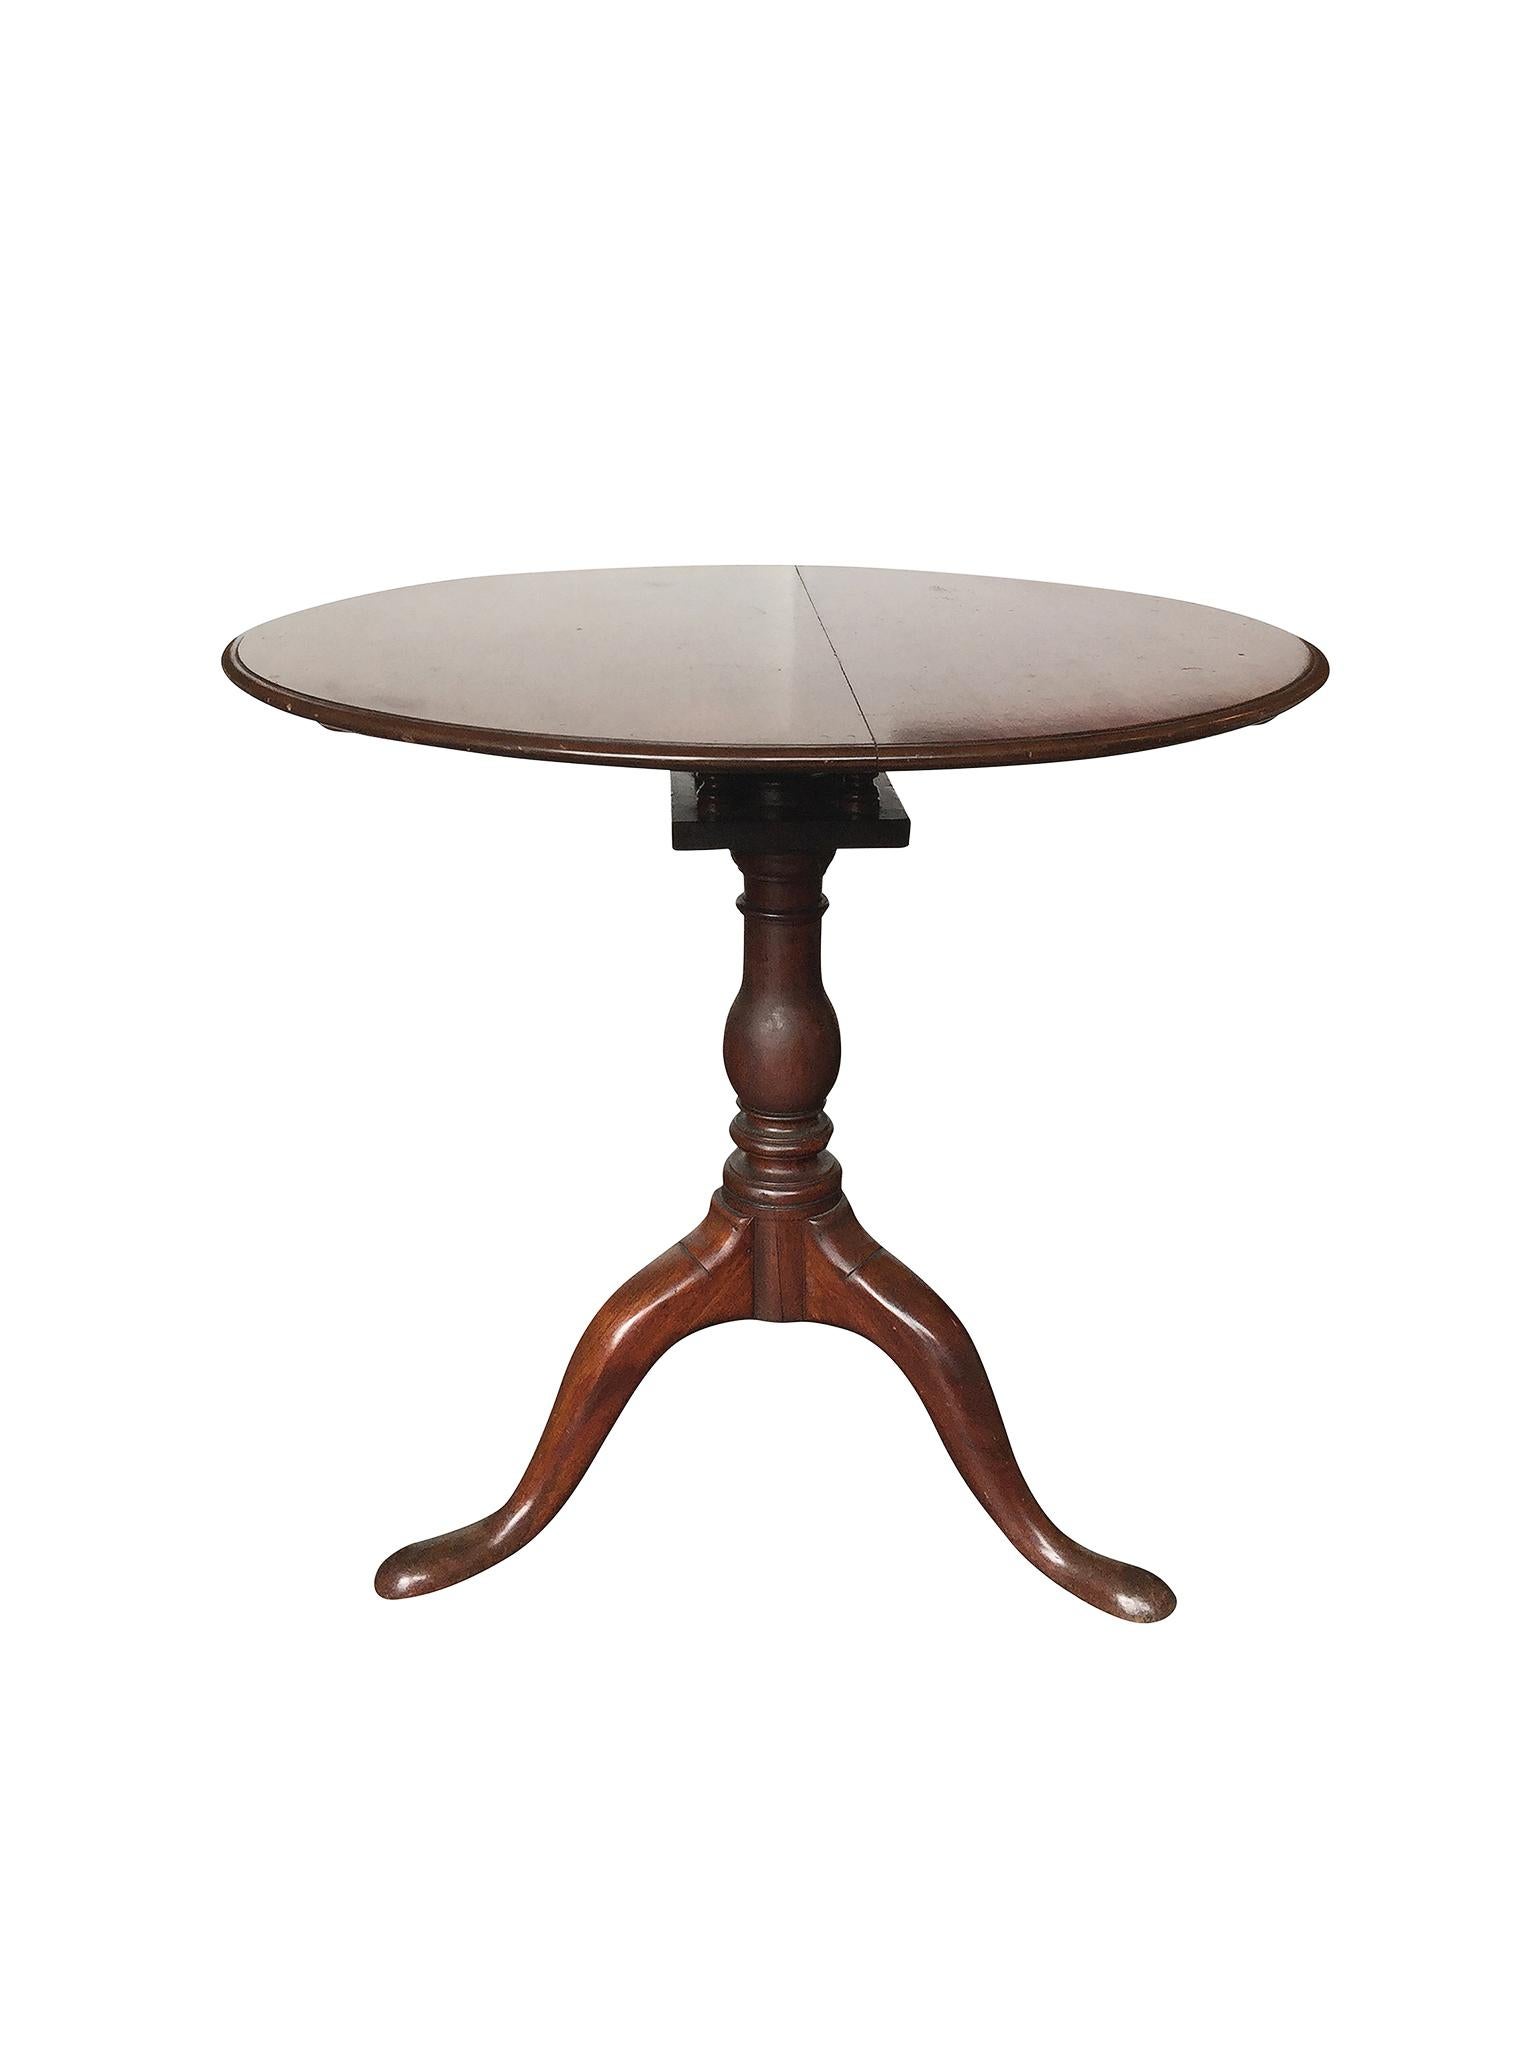 This American Chippendale tilt-top tea table was handcrafted in the 18th century from mahogany wood. It's comprised of a bevelled circular top and vase-form pedestal tripod base that culminates in snake feet. A 